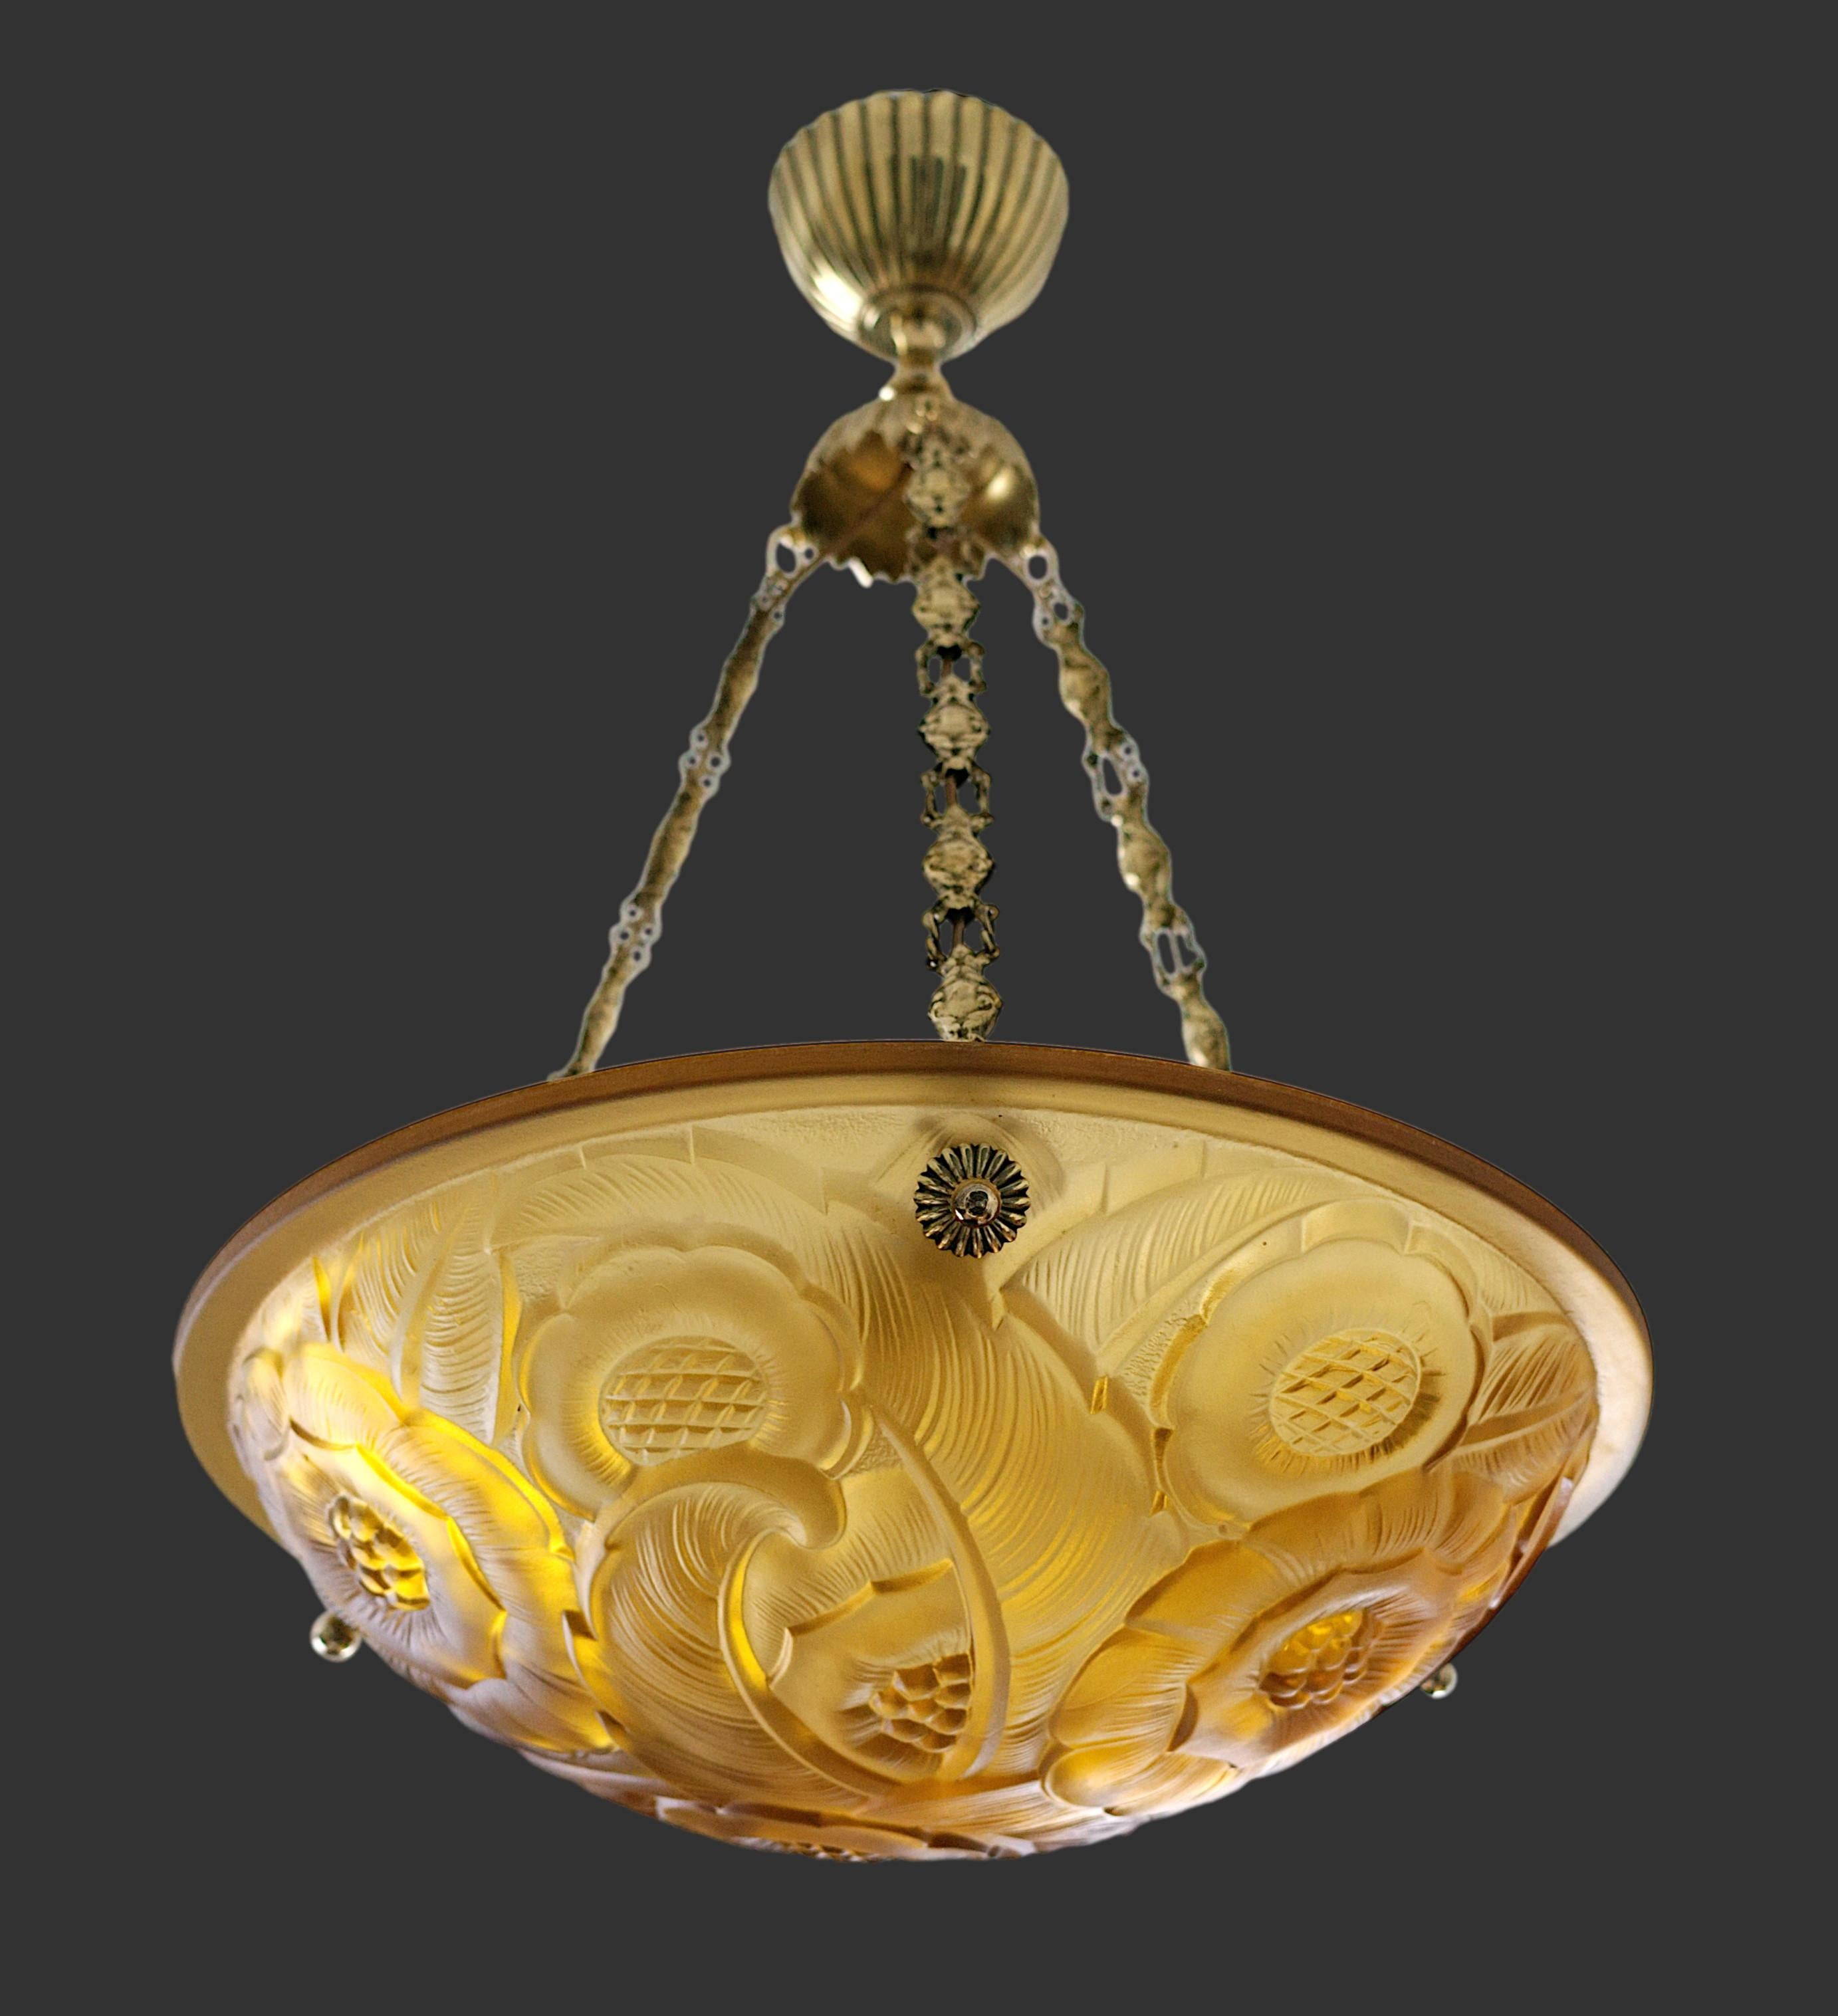 French Art Deco pendant chandelier by DEGUE (Compiegne), France, late 1920s. Mottled glass shade. Beautiful amber color. Period brass fixture. Height: 19